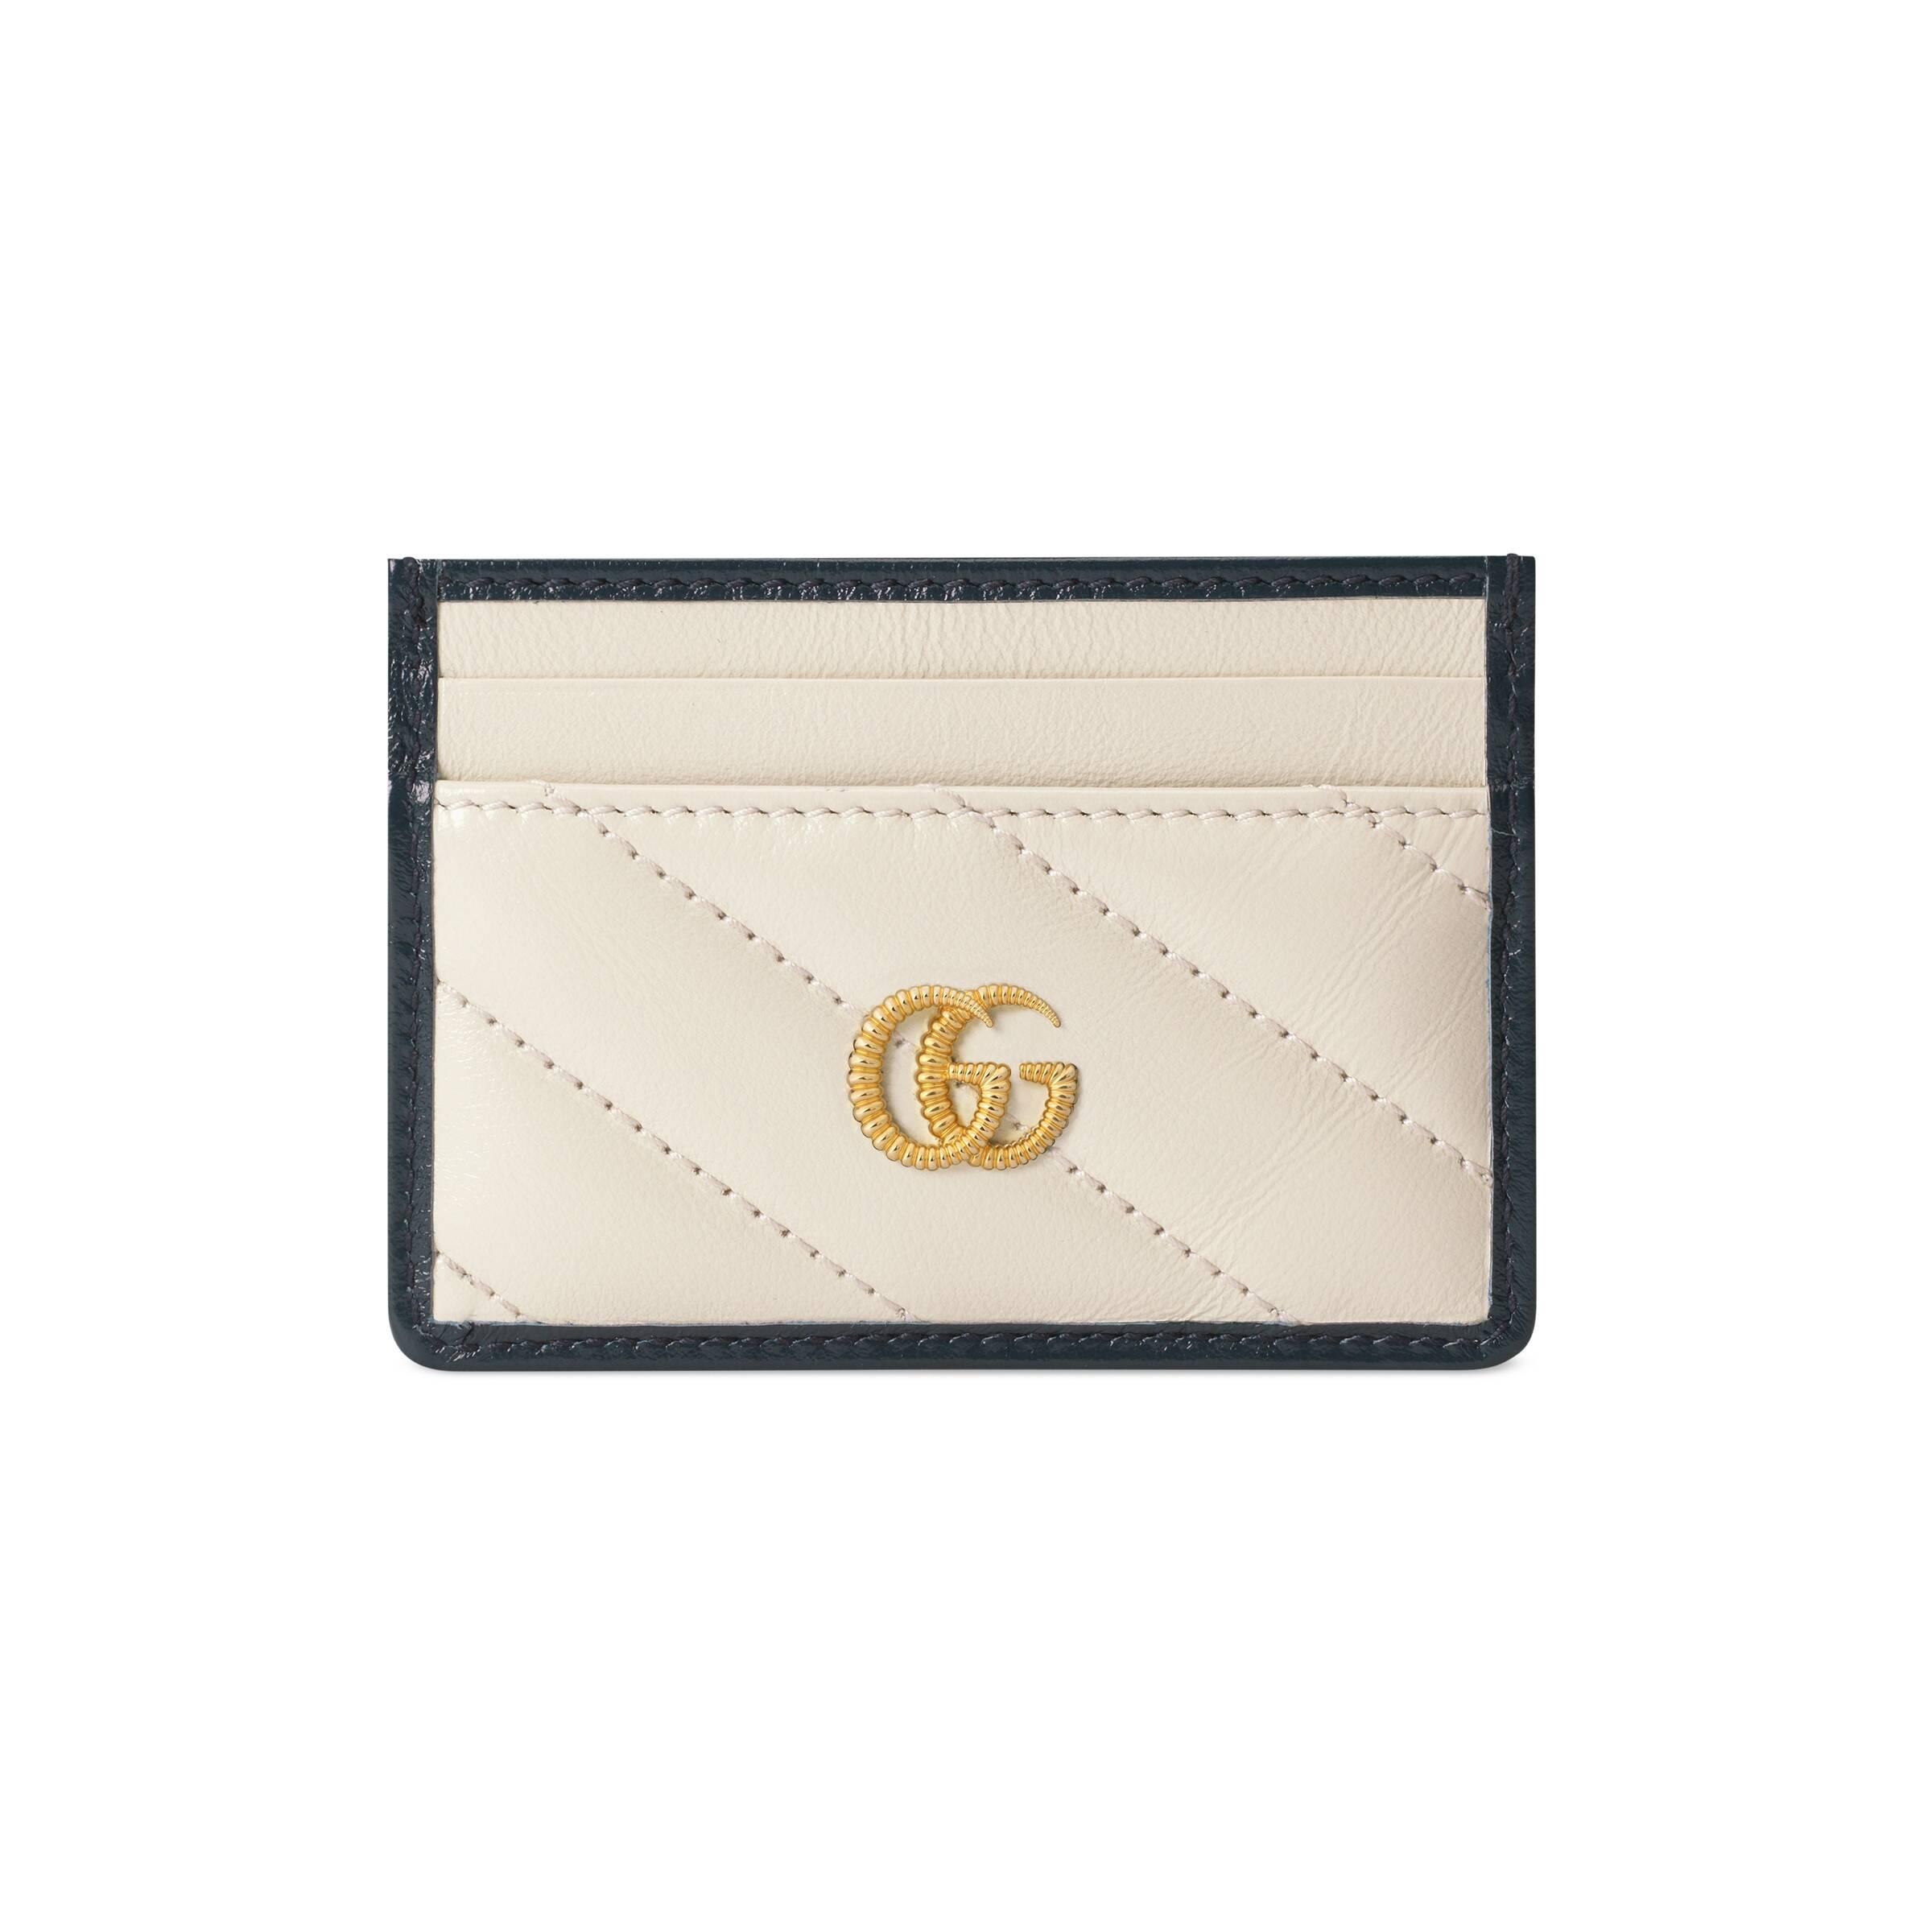 Gucci GG Marmont Card Case in White